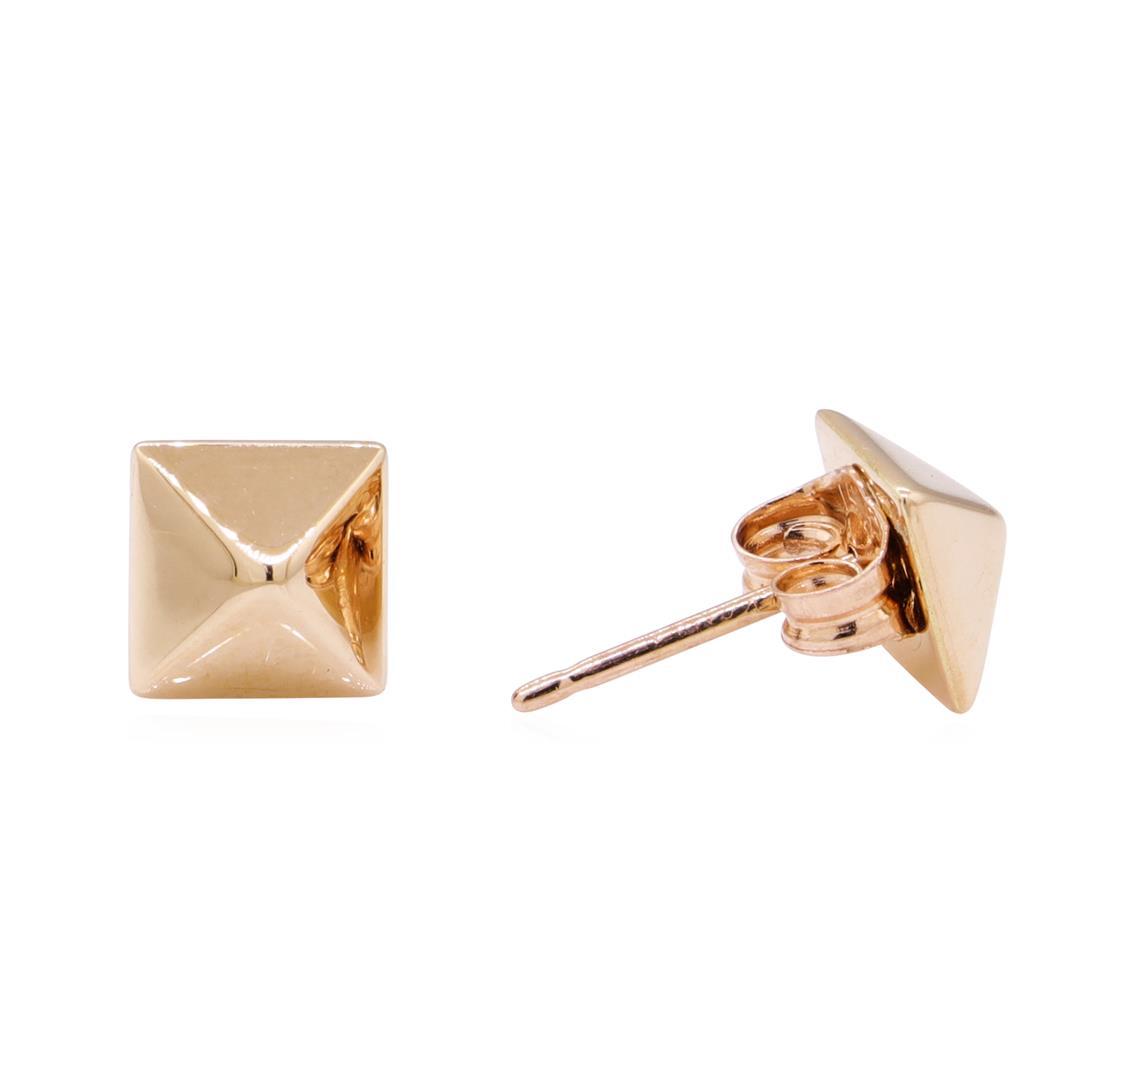 Pyramid Shaped Stud Earrings - 14KT Yellow Gold